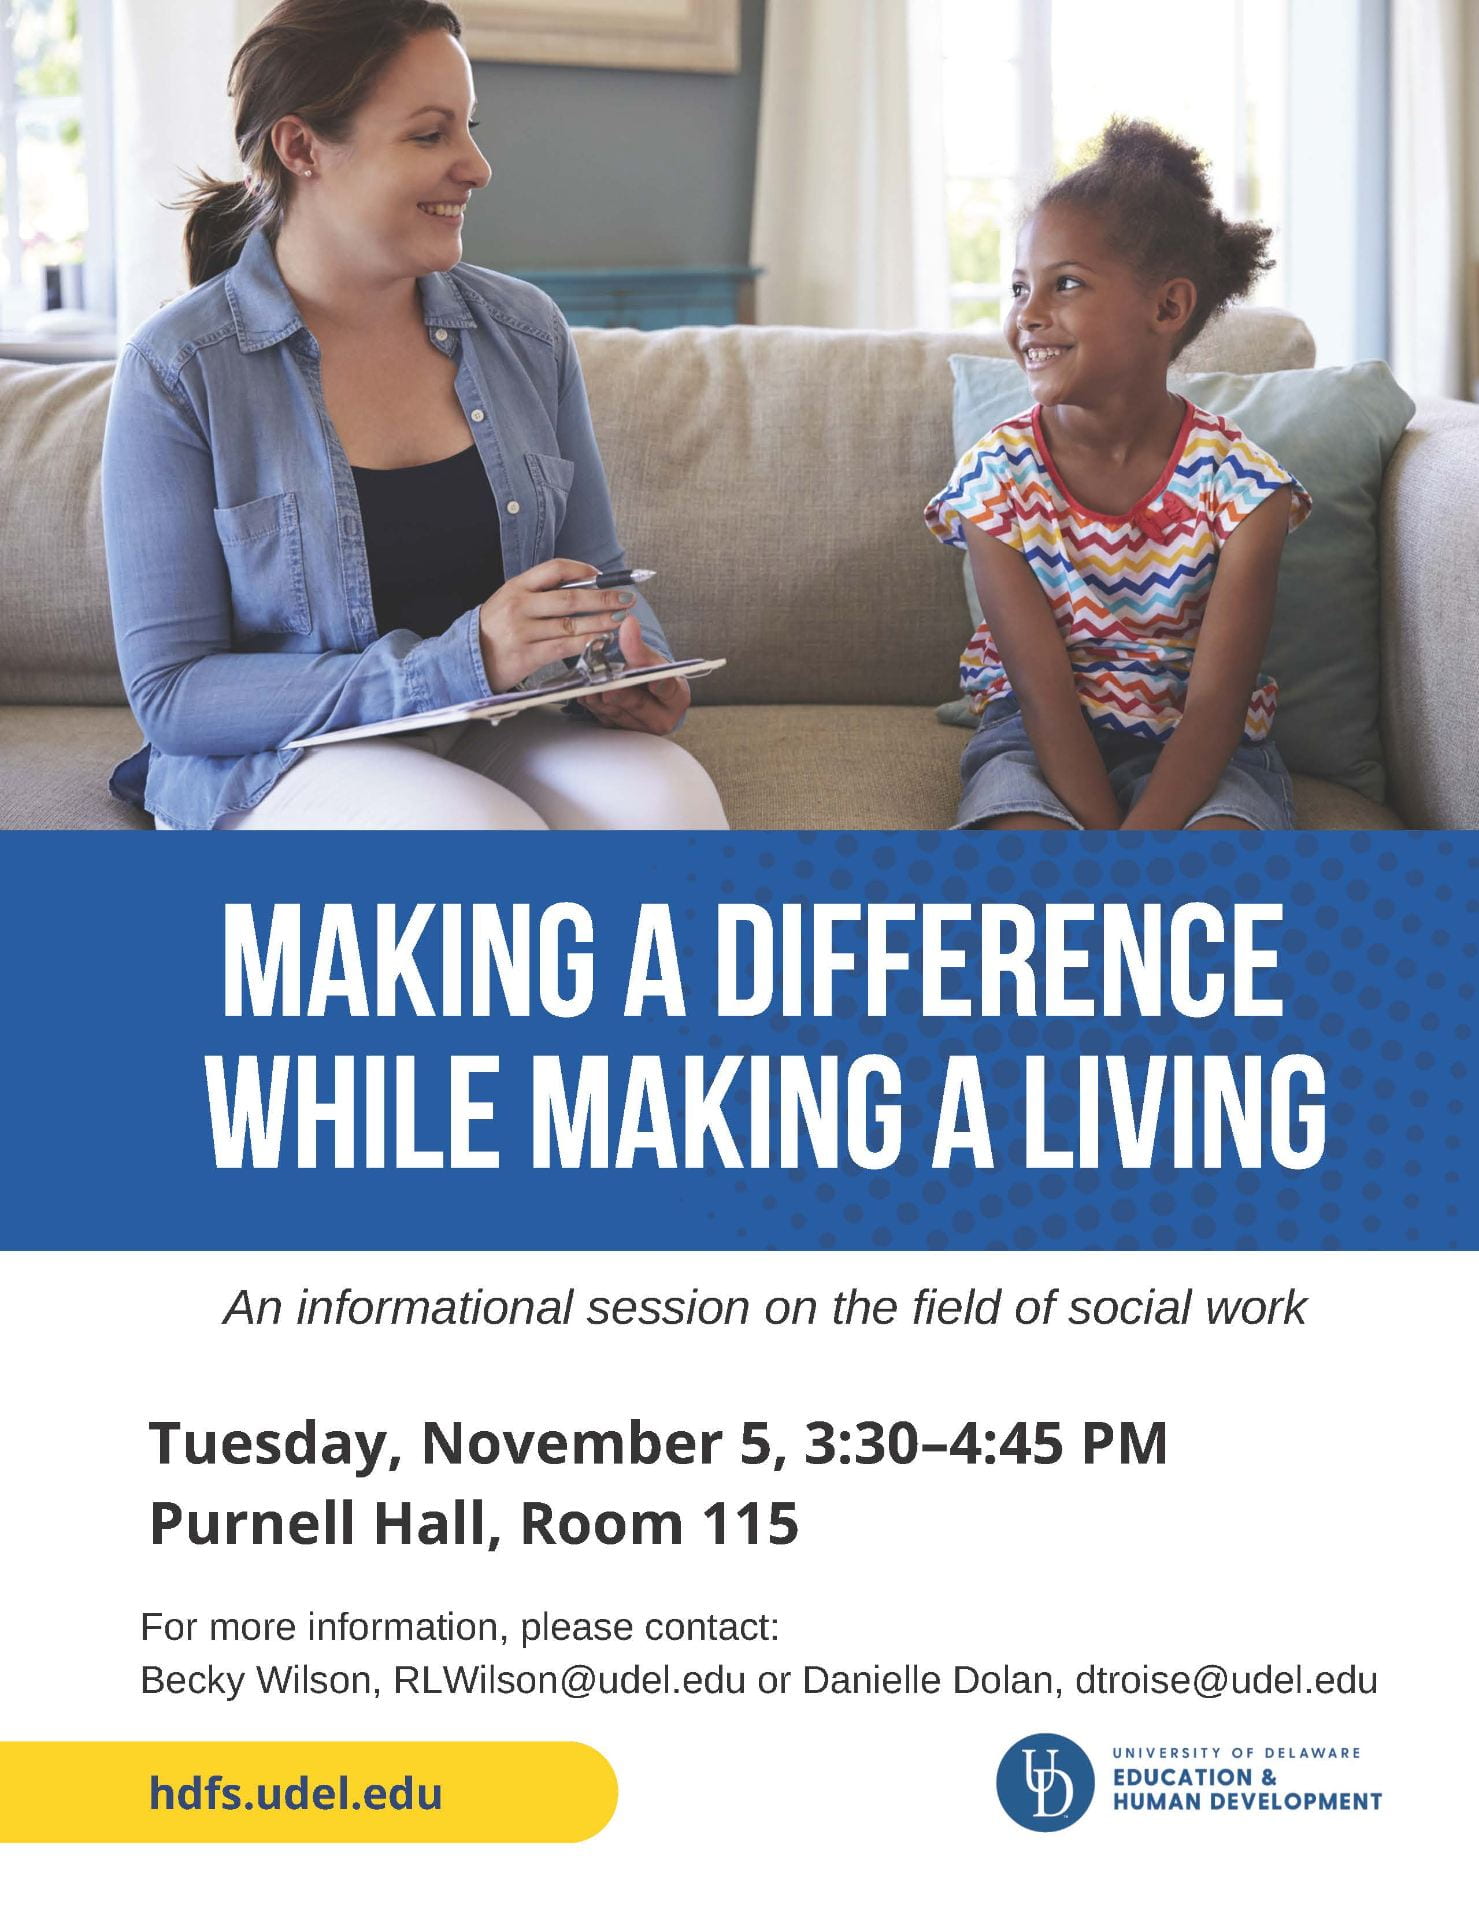 Making a Difference While Making a Living: an informational session on the field of social work. Tuesday, November 5, 3:30-4:45 PM, Purnell Hall, Room 115. For more information, please contact: Becky Wilson, RLWilson@udel.edu, or Danielle Dolan, dtroise@udel.edu. hdfs.udel.edu